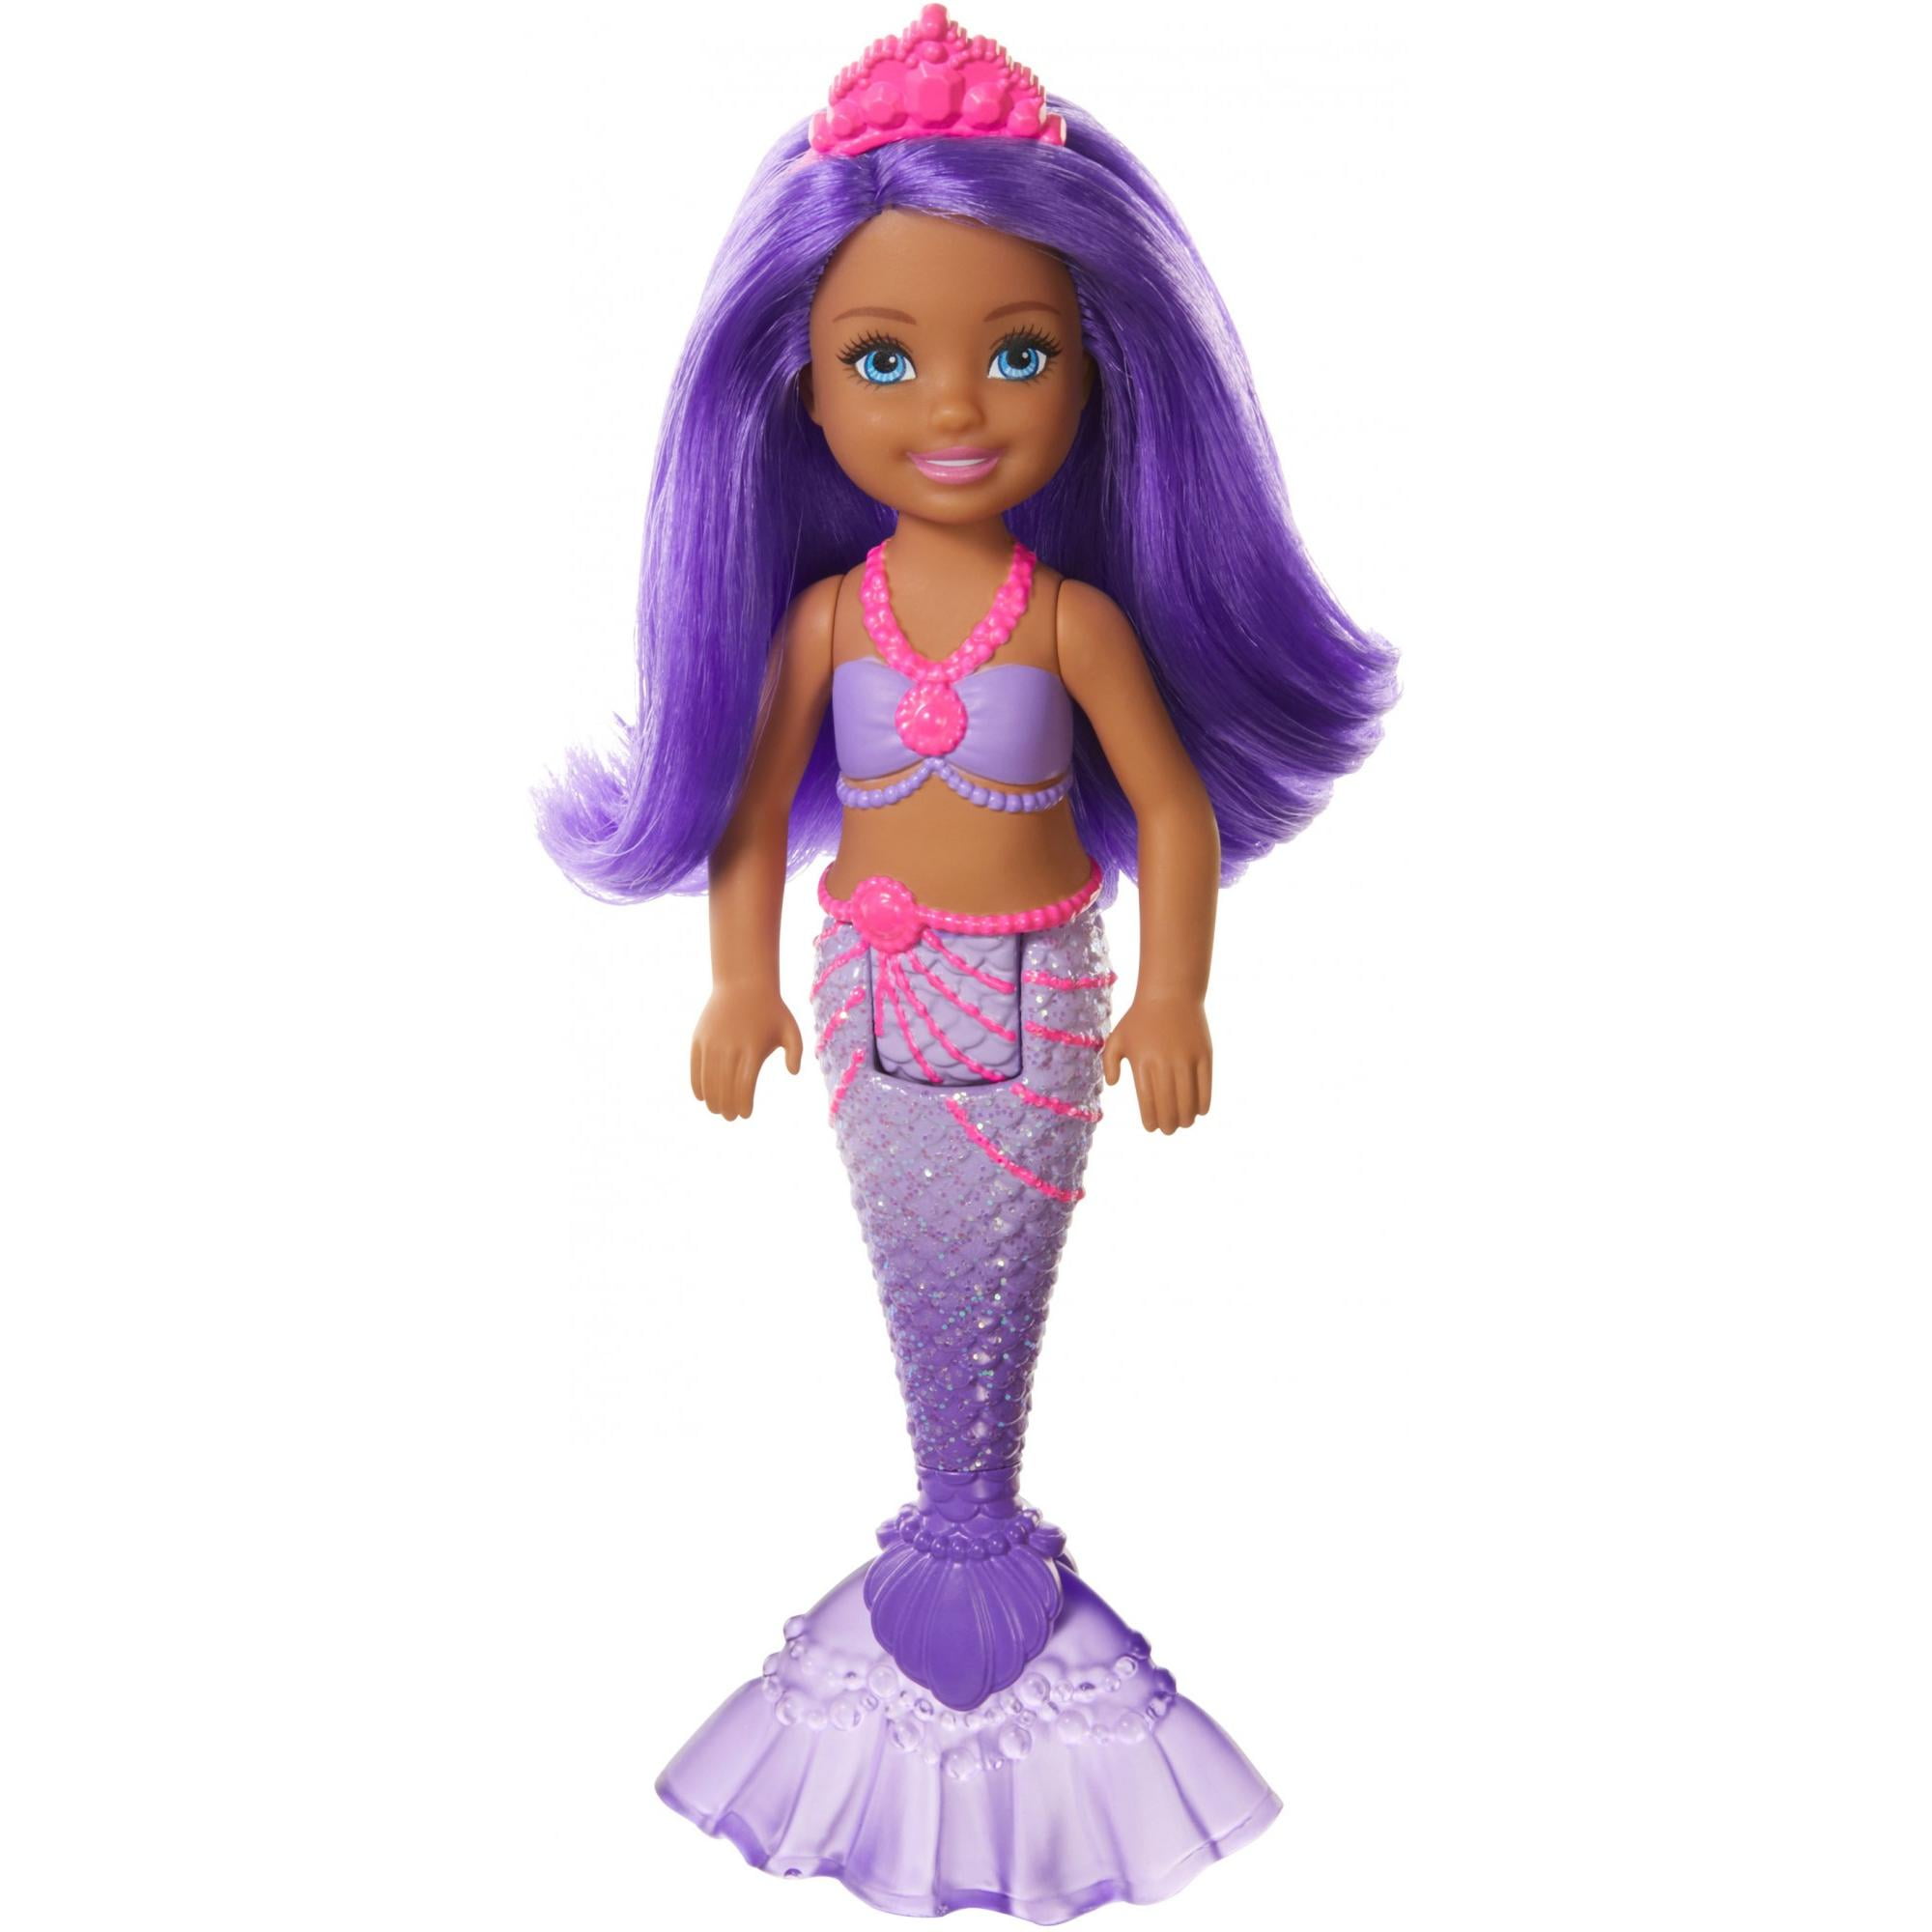 Barbie Dreamtopia Chelsea Mermaid Doll 6 5 Inch With Purple Hair And Tail